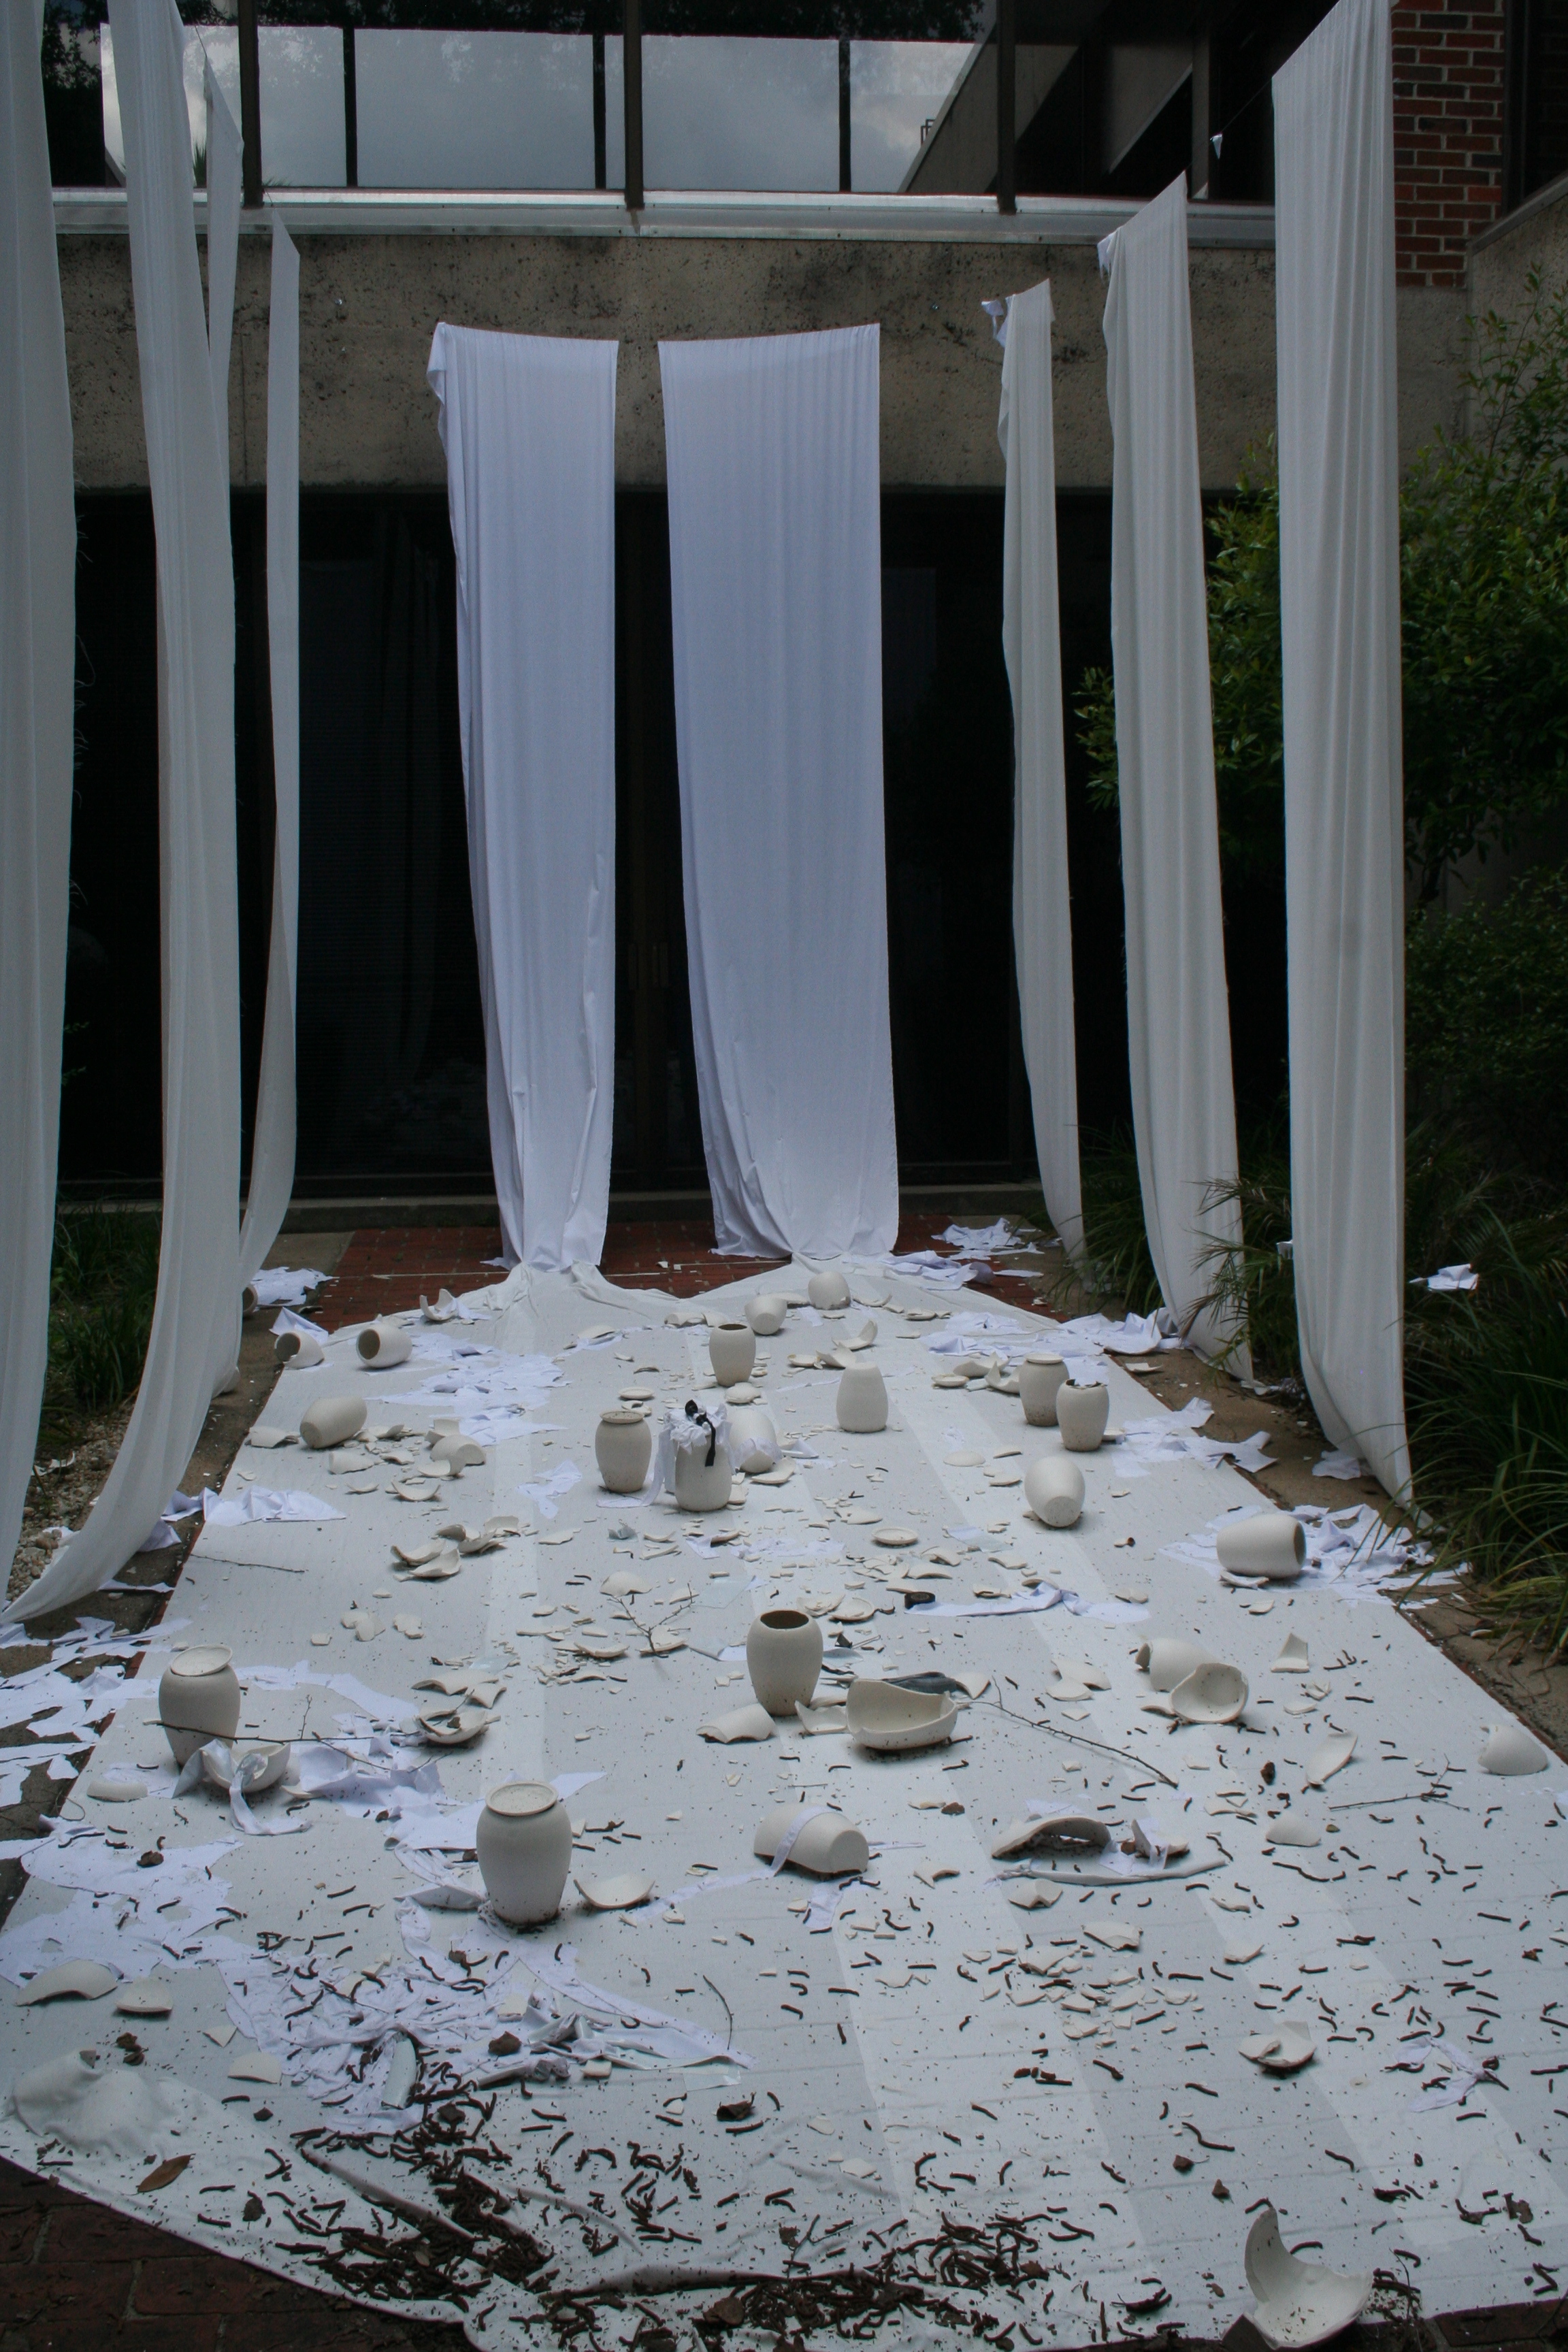 several broken pieces of pottery scattered on a white blanket